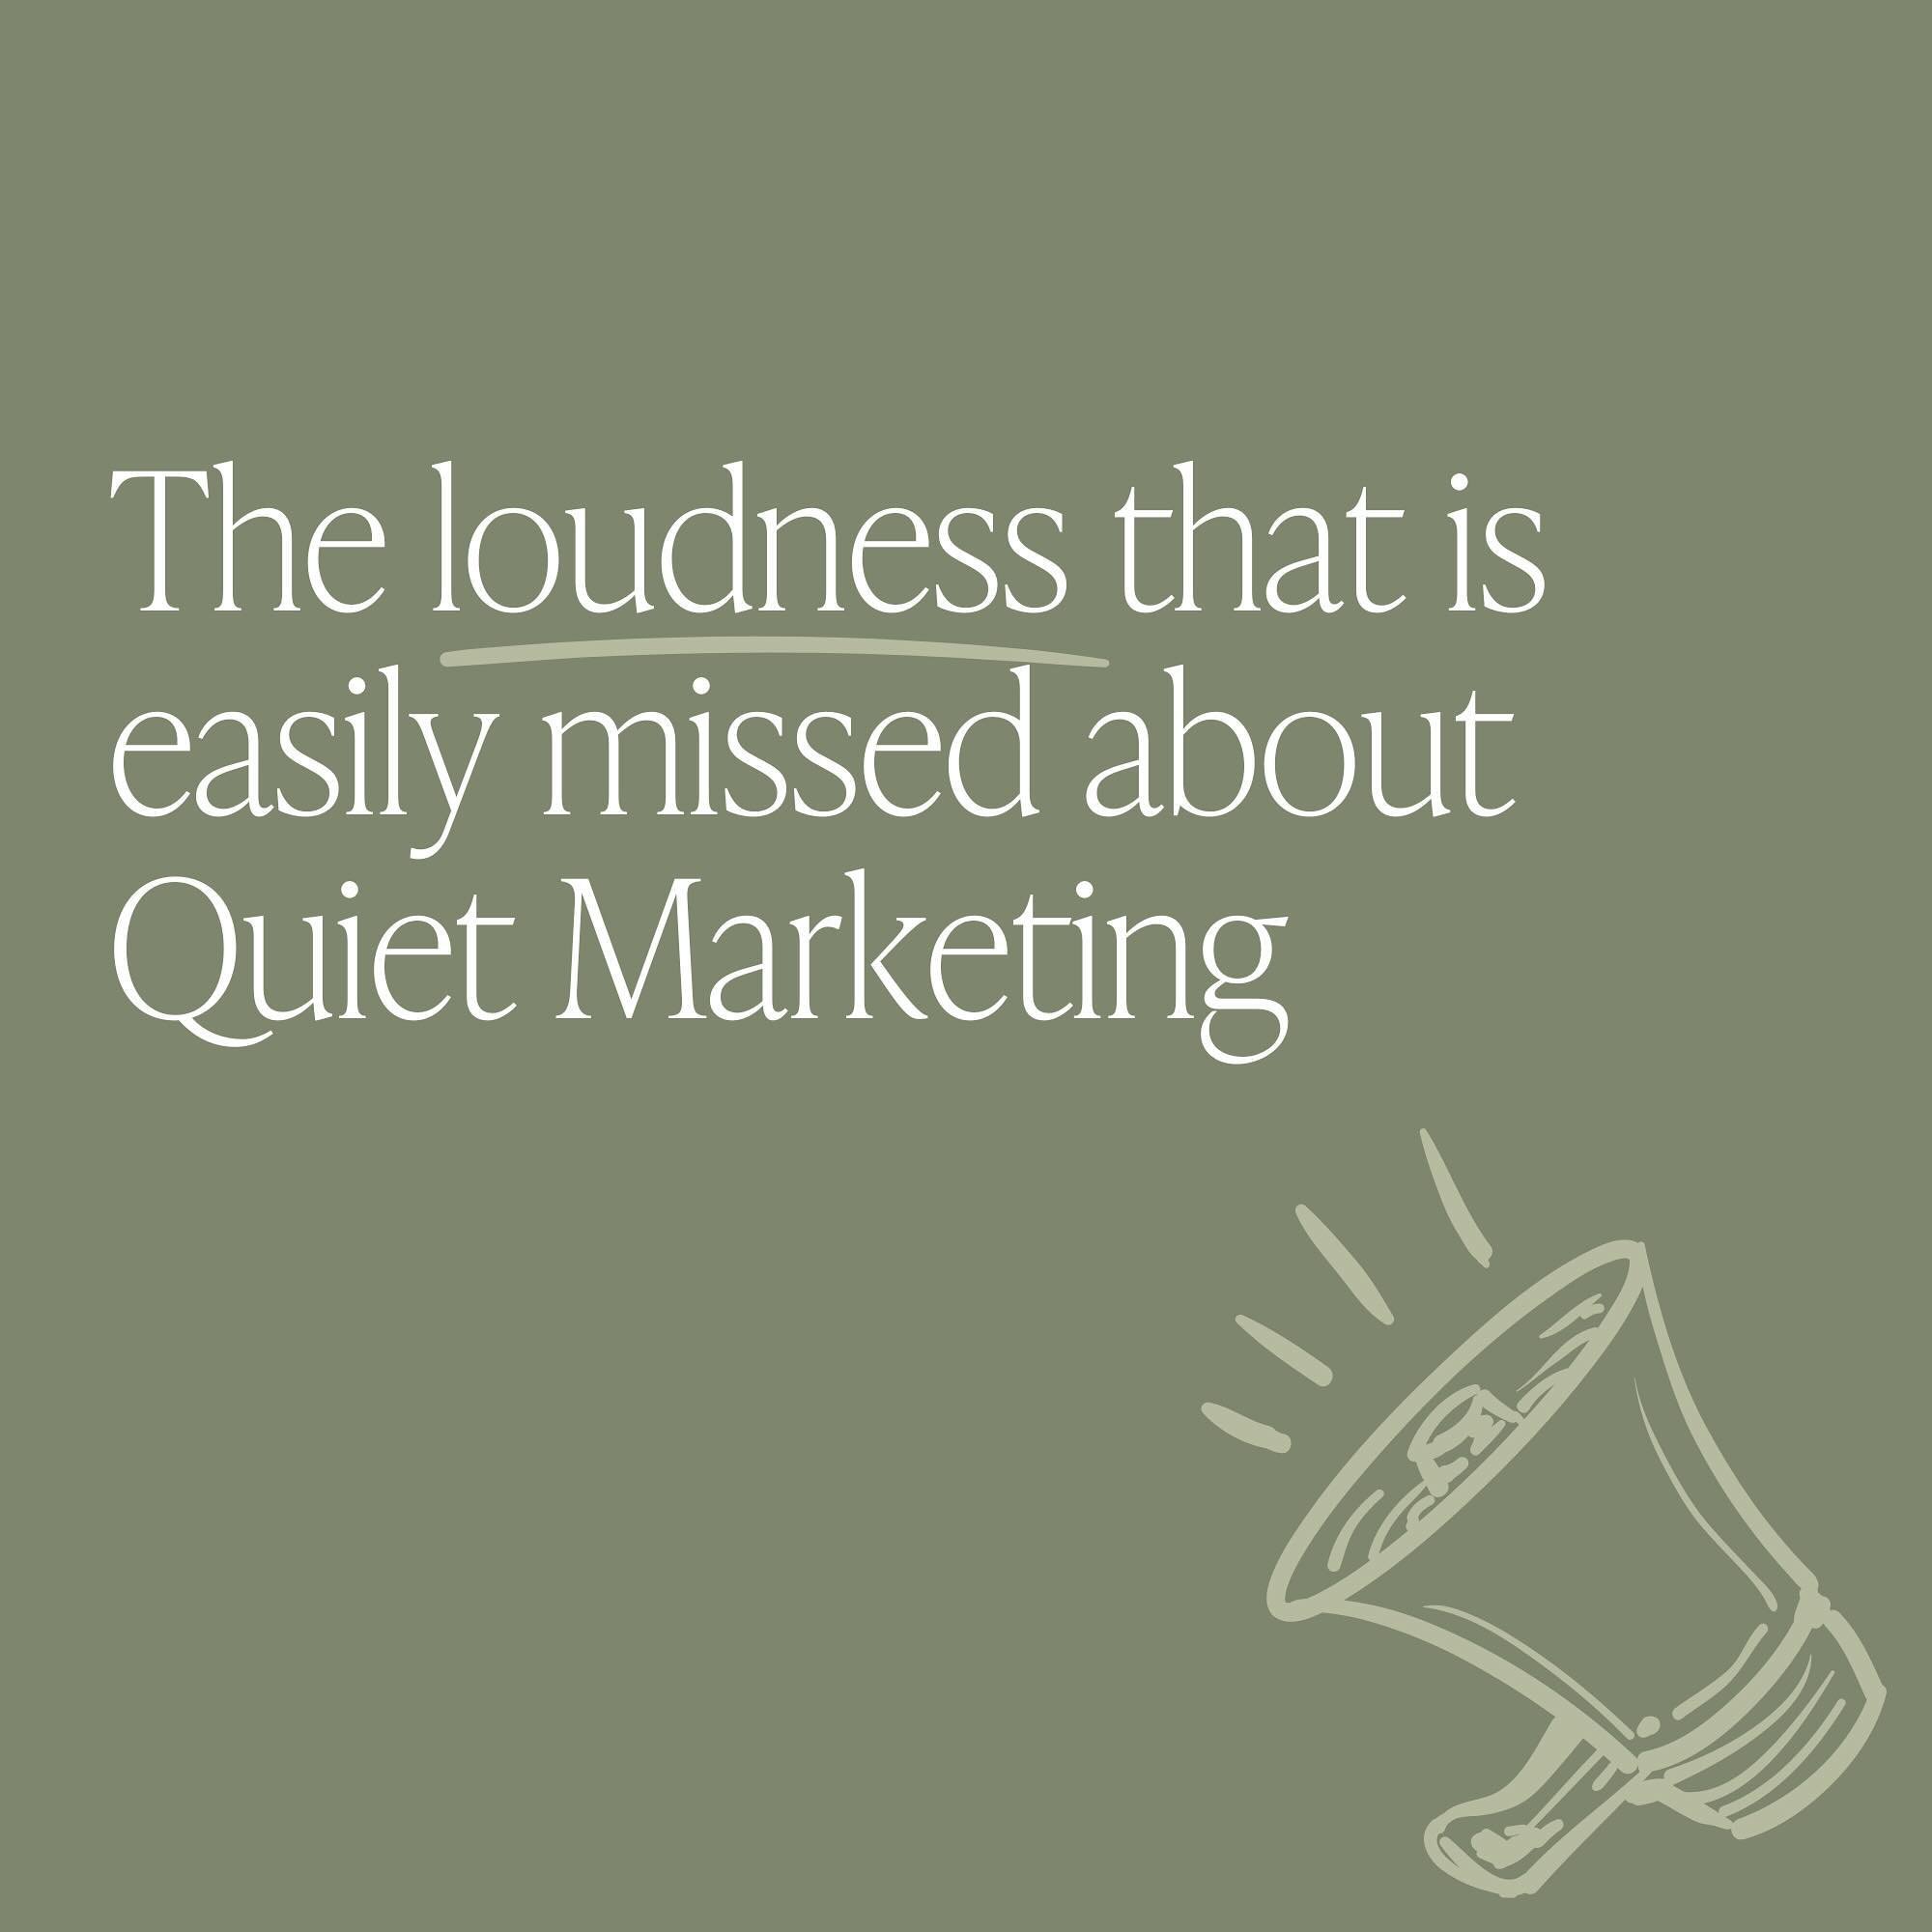 At first glance Quiet Marketing can be mistaken as a meek, shy, less impactful approach to marketing.

When actually, it&rsquo;s about bucking the trends and defying the status quo of how marketing is done.

It can look like saying &ldquo;No, that fe